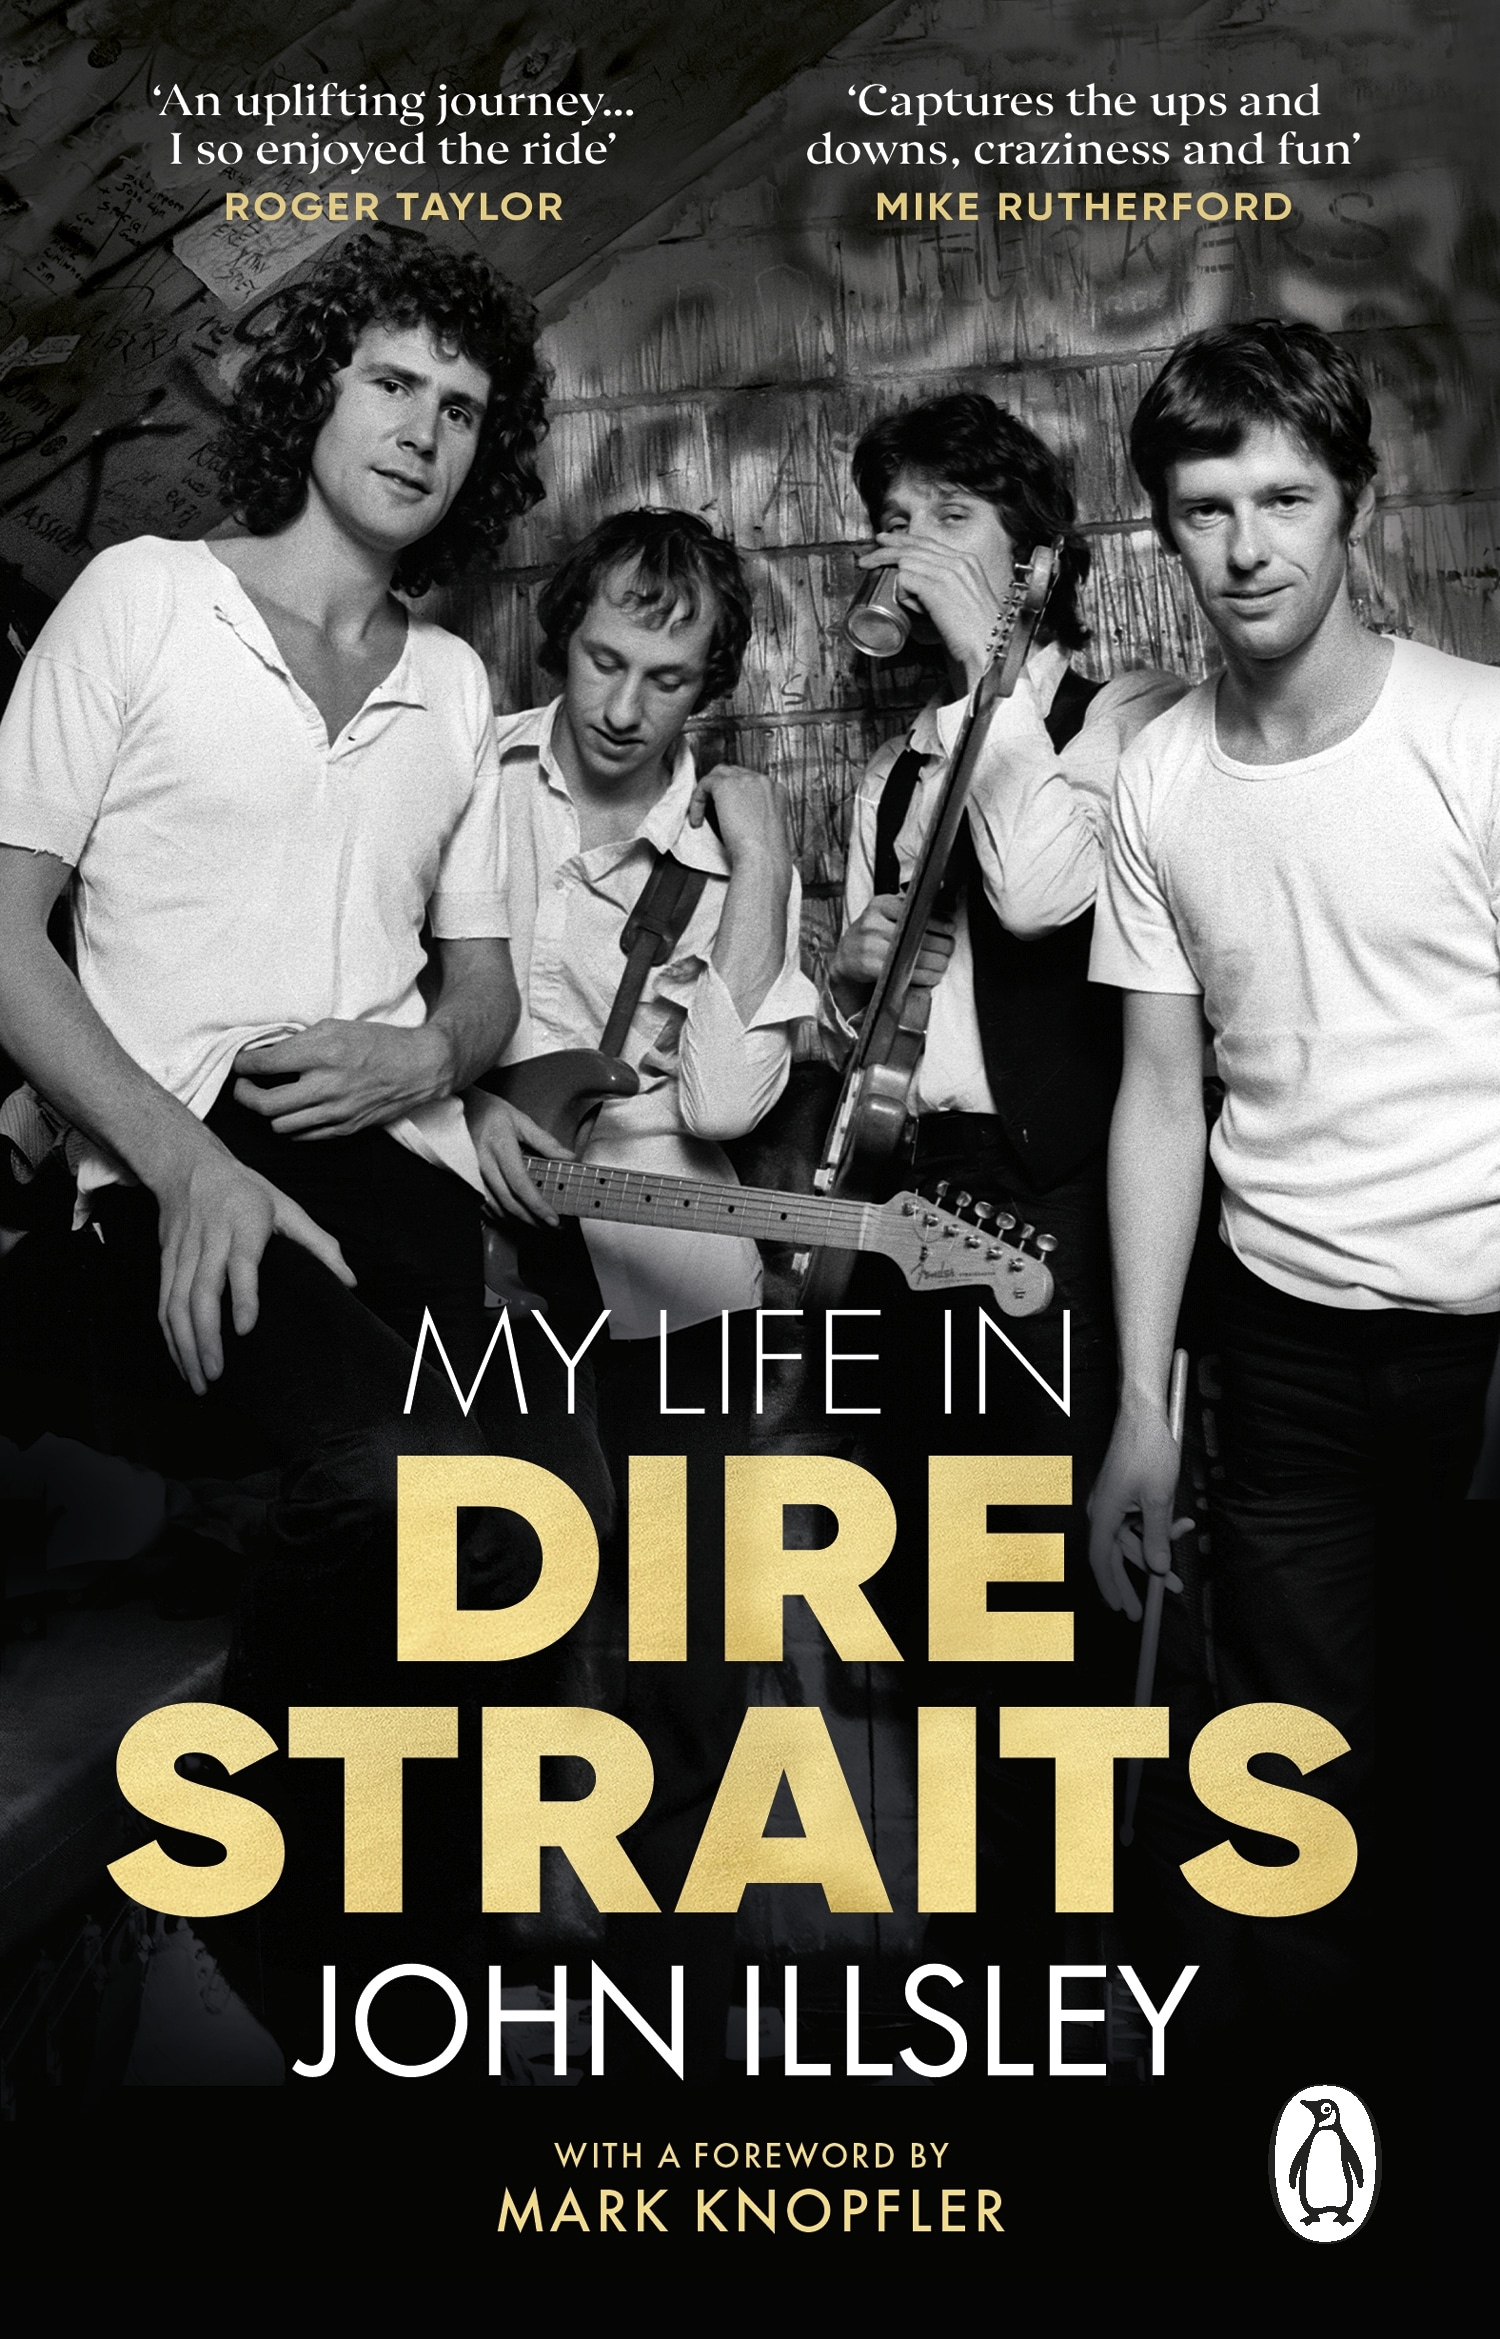 Book “My Life in Dire Straits” by John Illsley — June 9, 2022